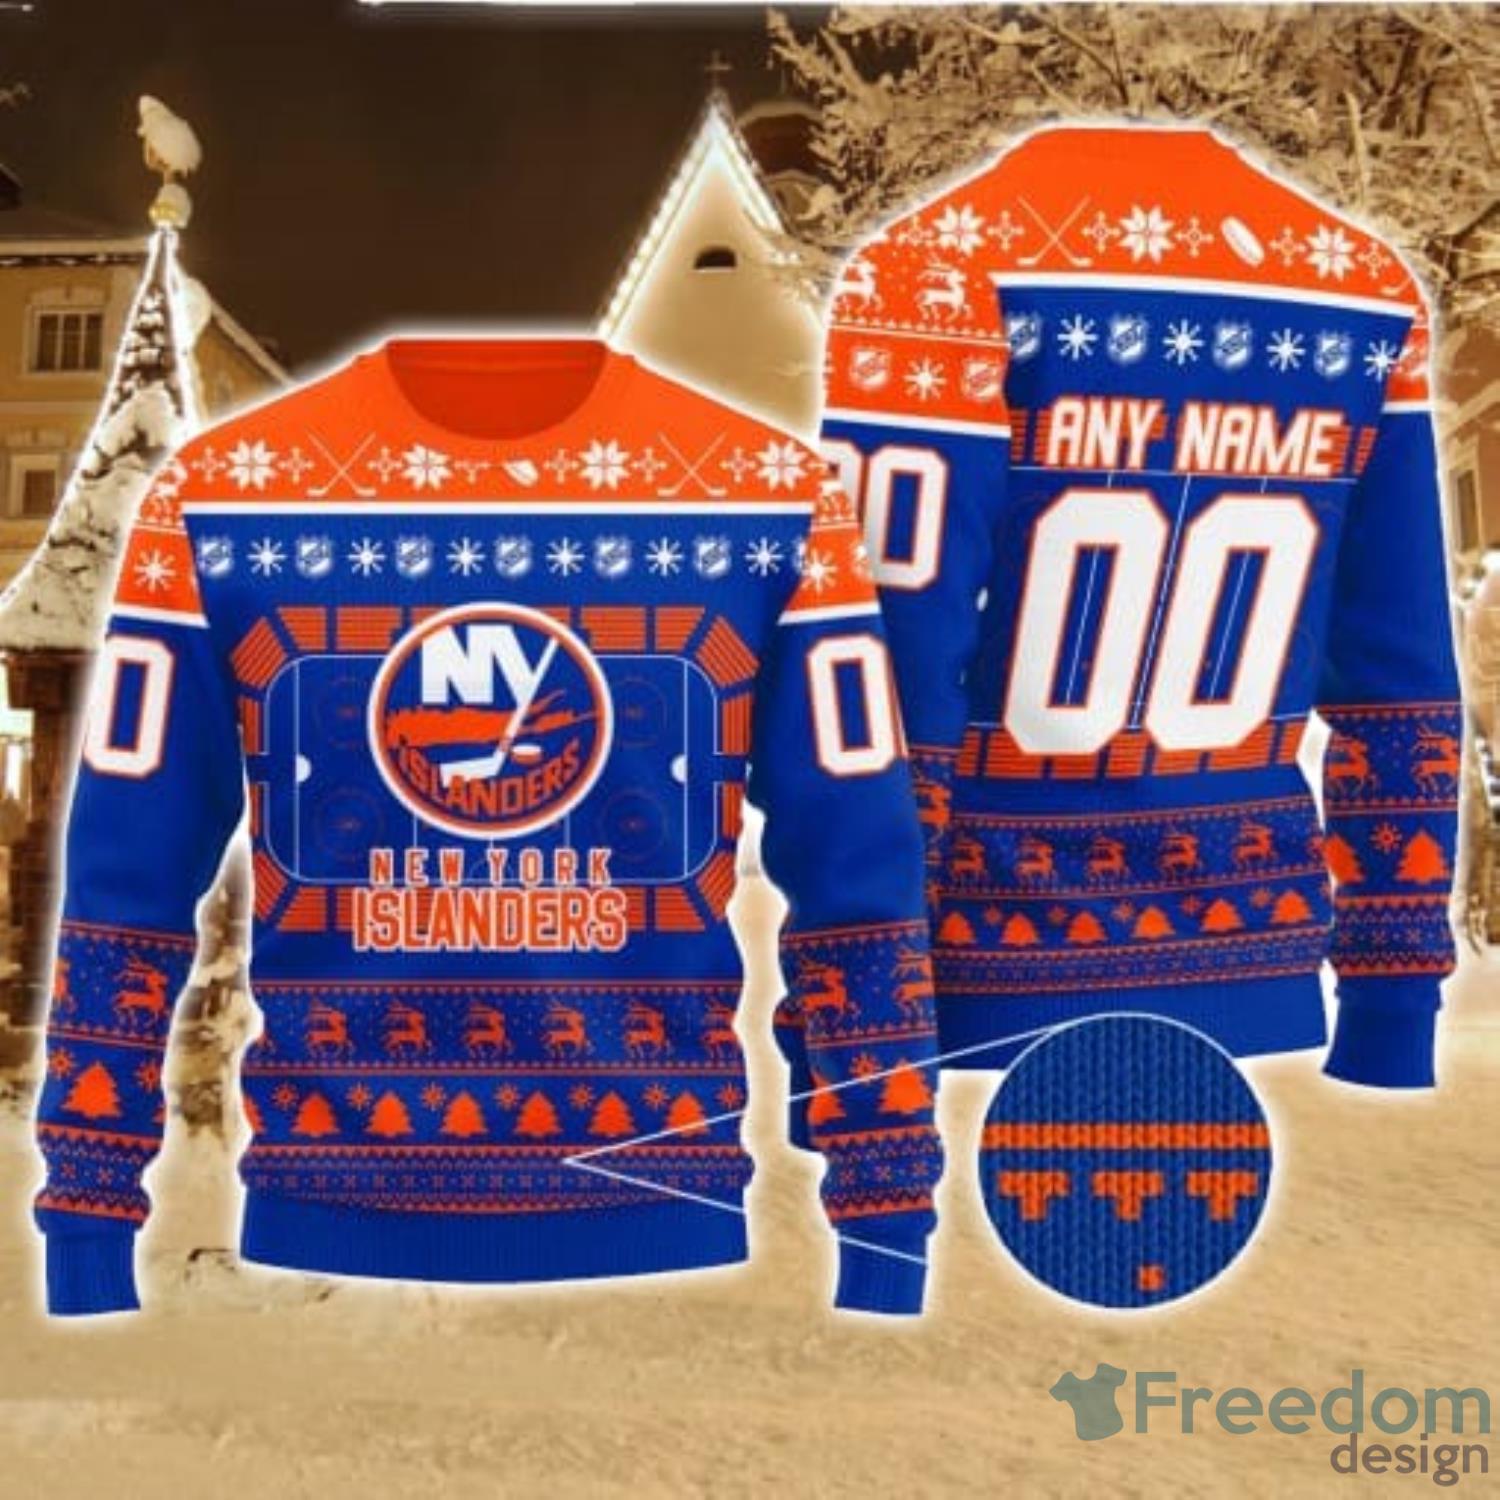 New York Islanders Even Santa Claus Cheers For Christmas NHL Shirt For Fans